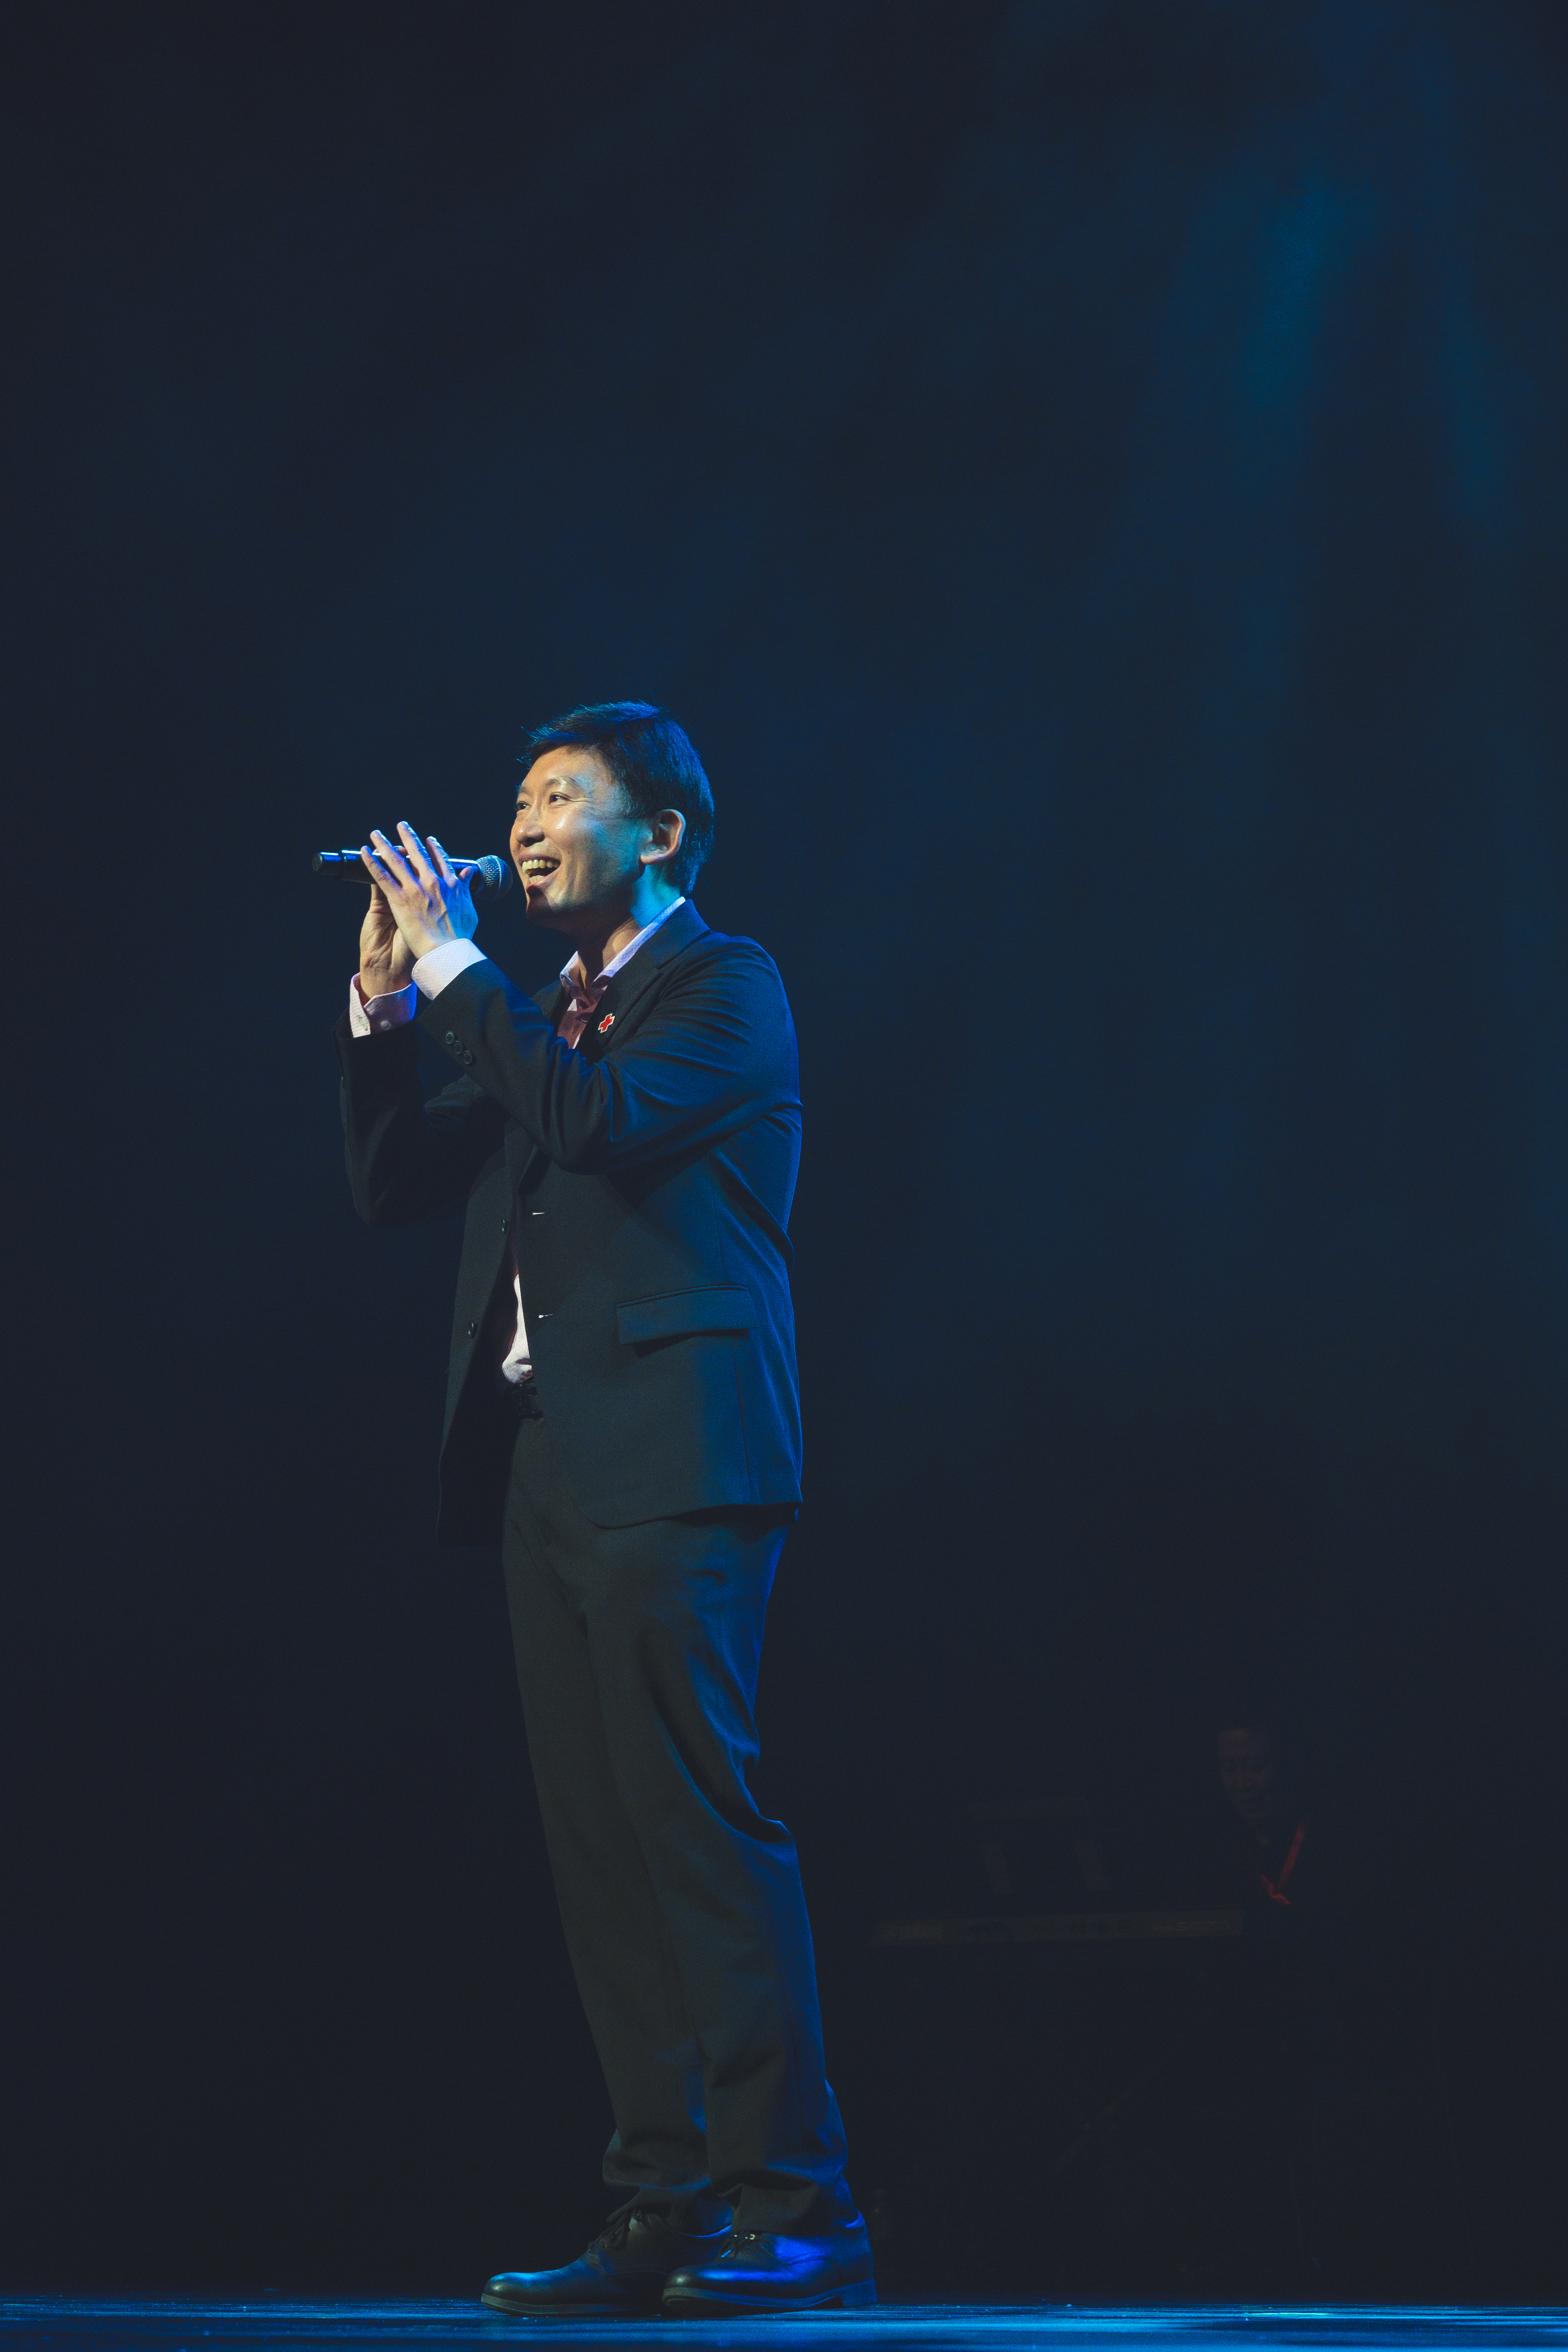 Senior Minister of State Mr Chee Hong Tat at Singapore Red Cross Charity Concert 2022